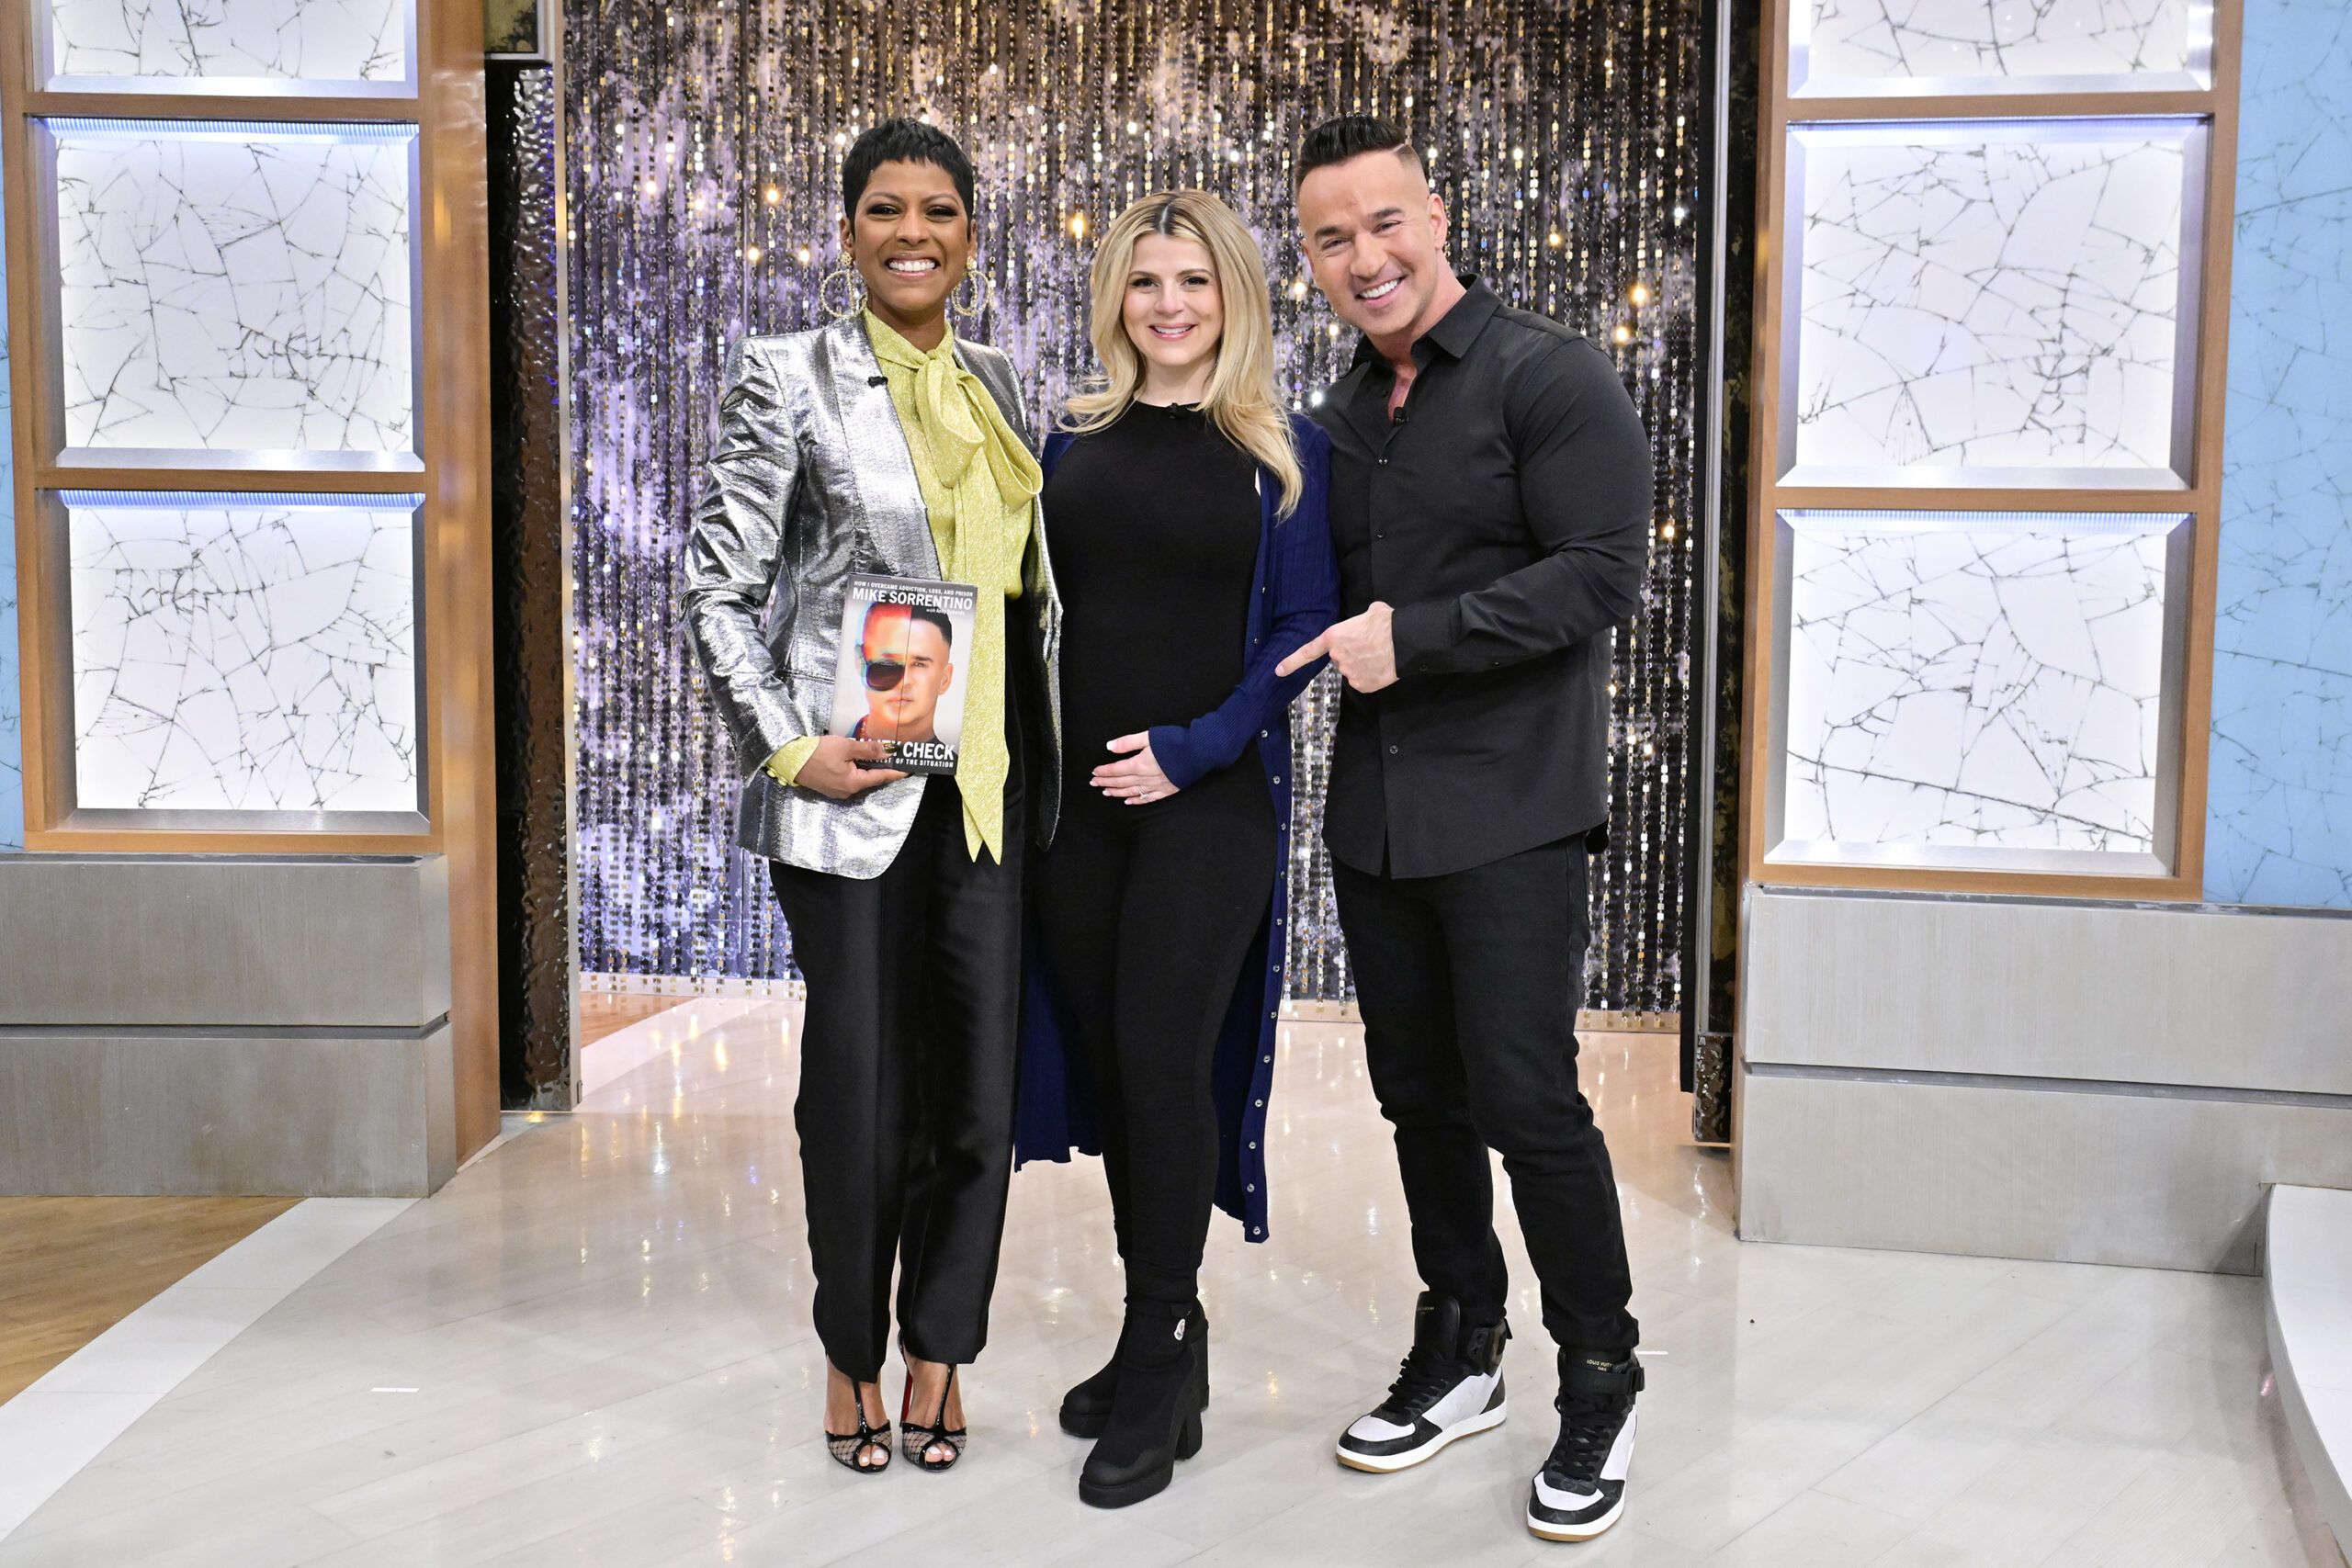 Mike “The Situation” Gets Real About His Struggles With Addiction And Fame On “Tamron Hall”